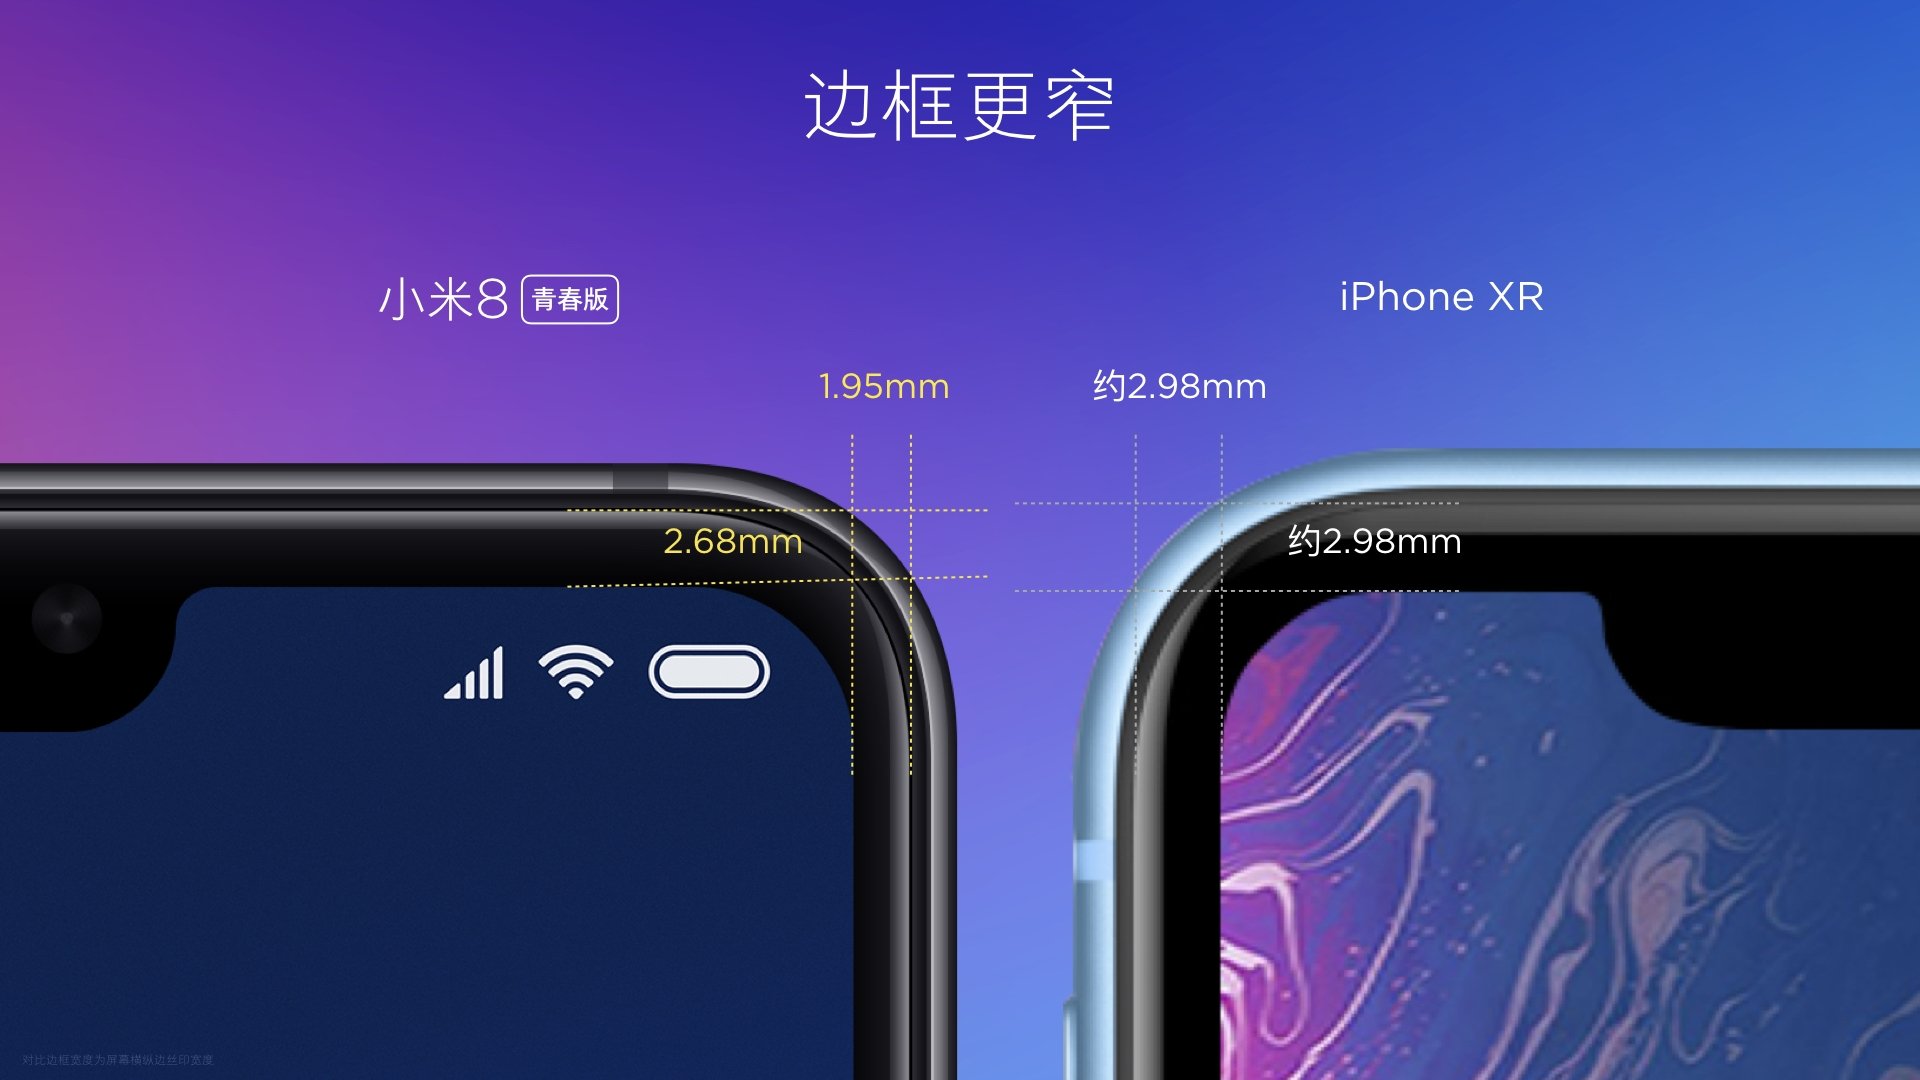 Xiaomi Mi 8 Lite With 626 Inch 199 Display Sd660 Soc And Dual